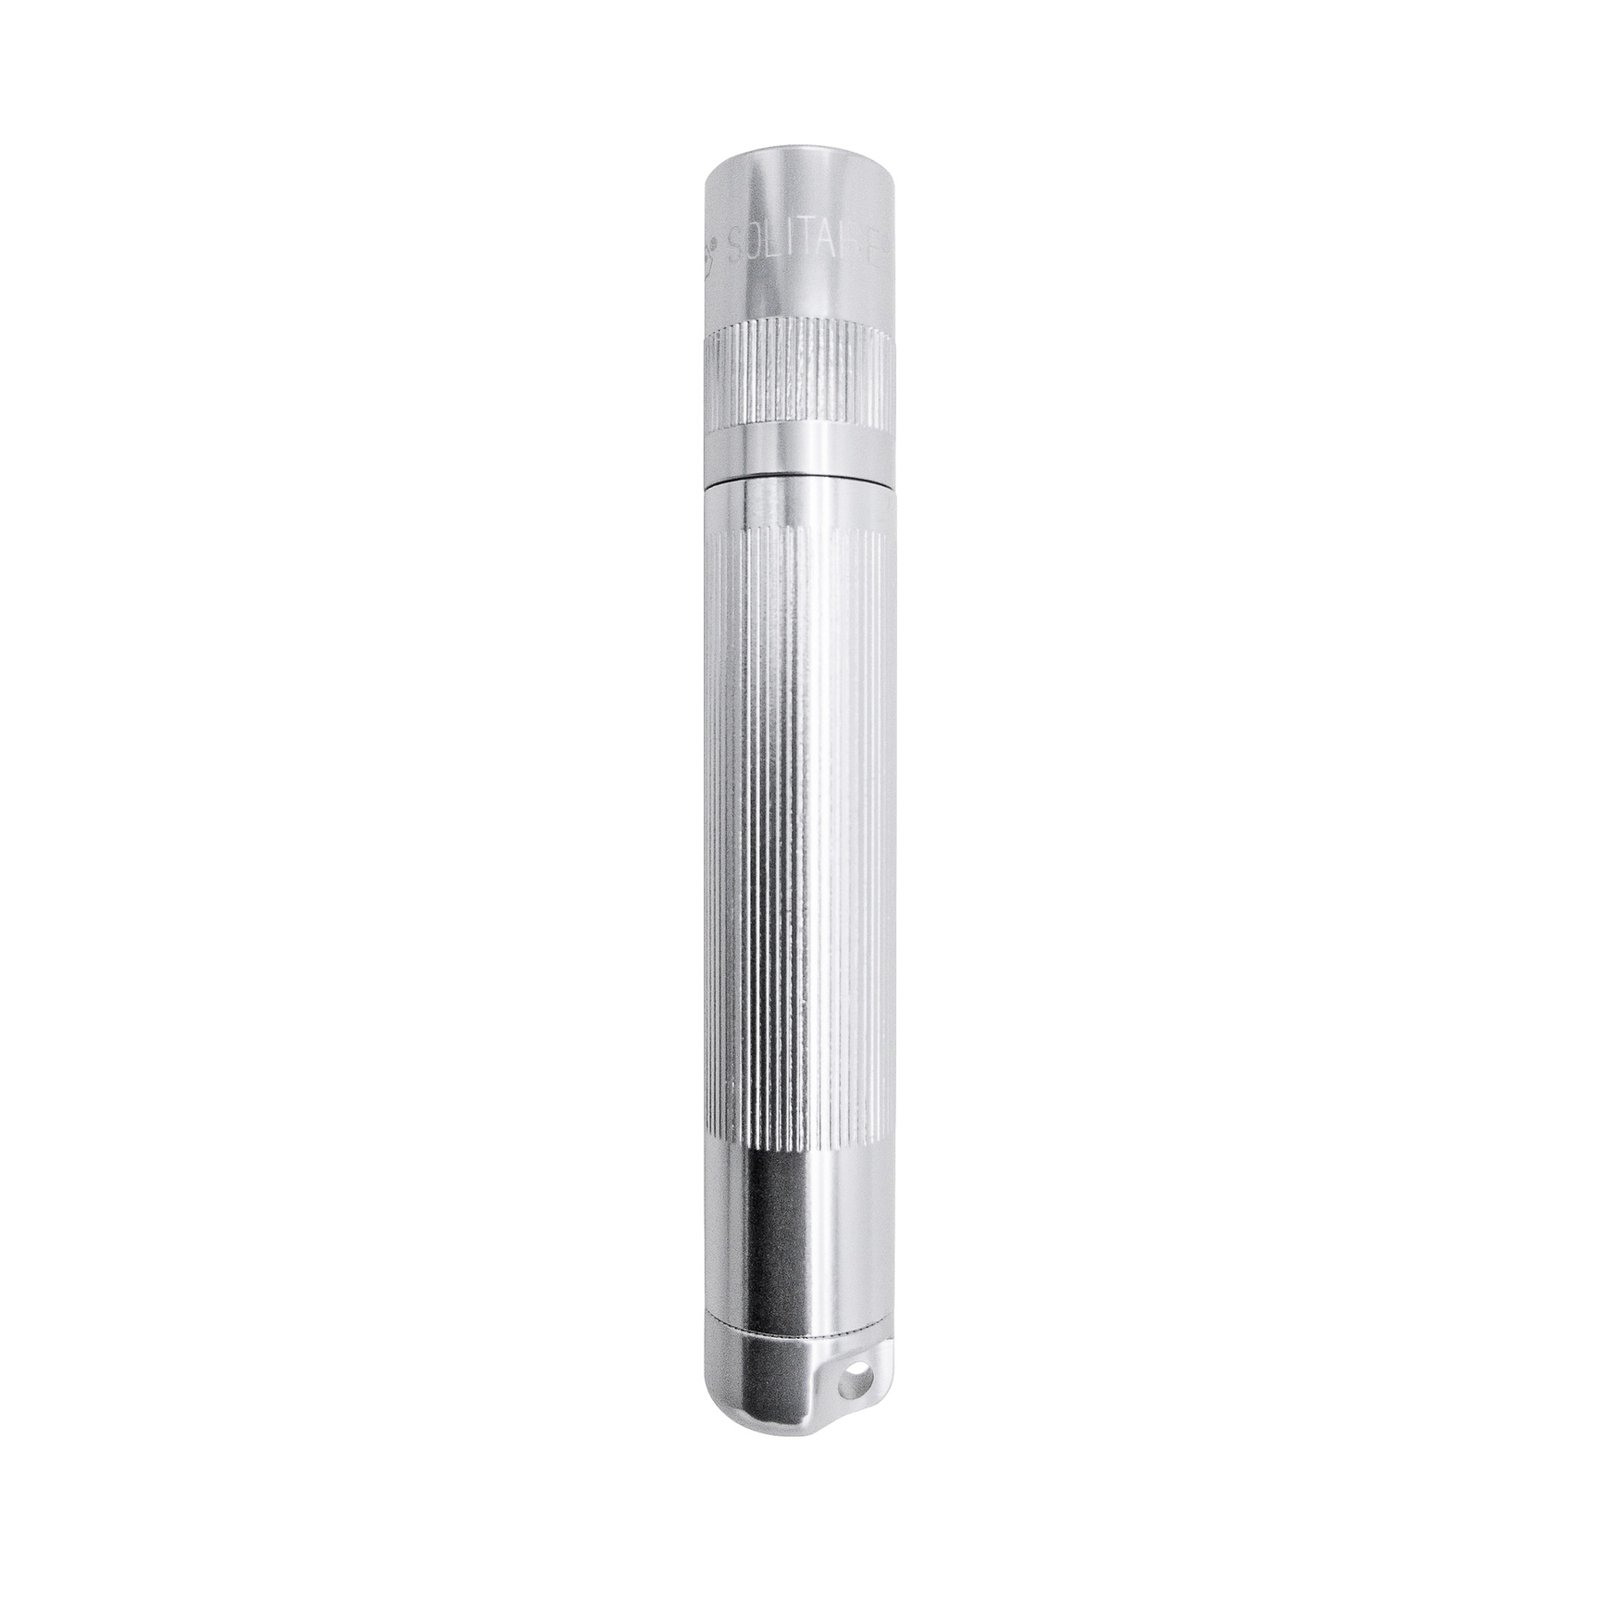 Maglite Xenon lommelygte Solitaire 1-Cell AAA, æske, sølv